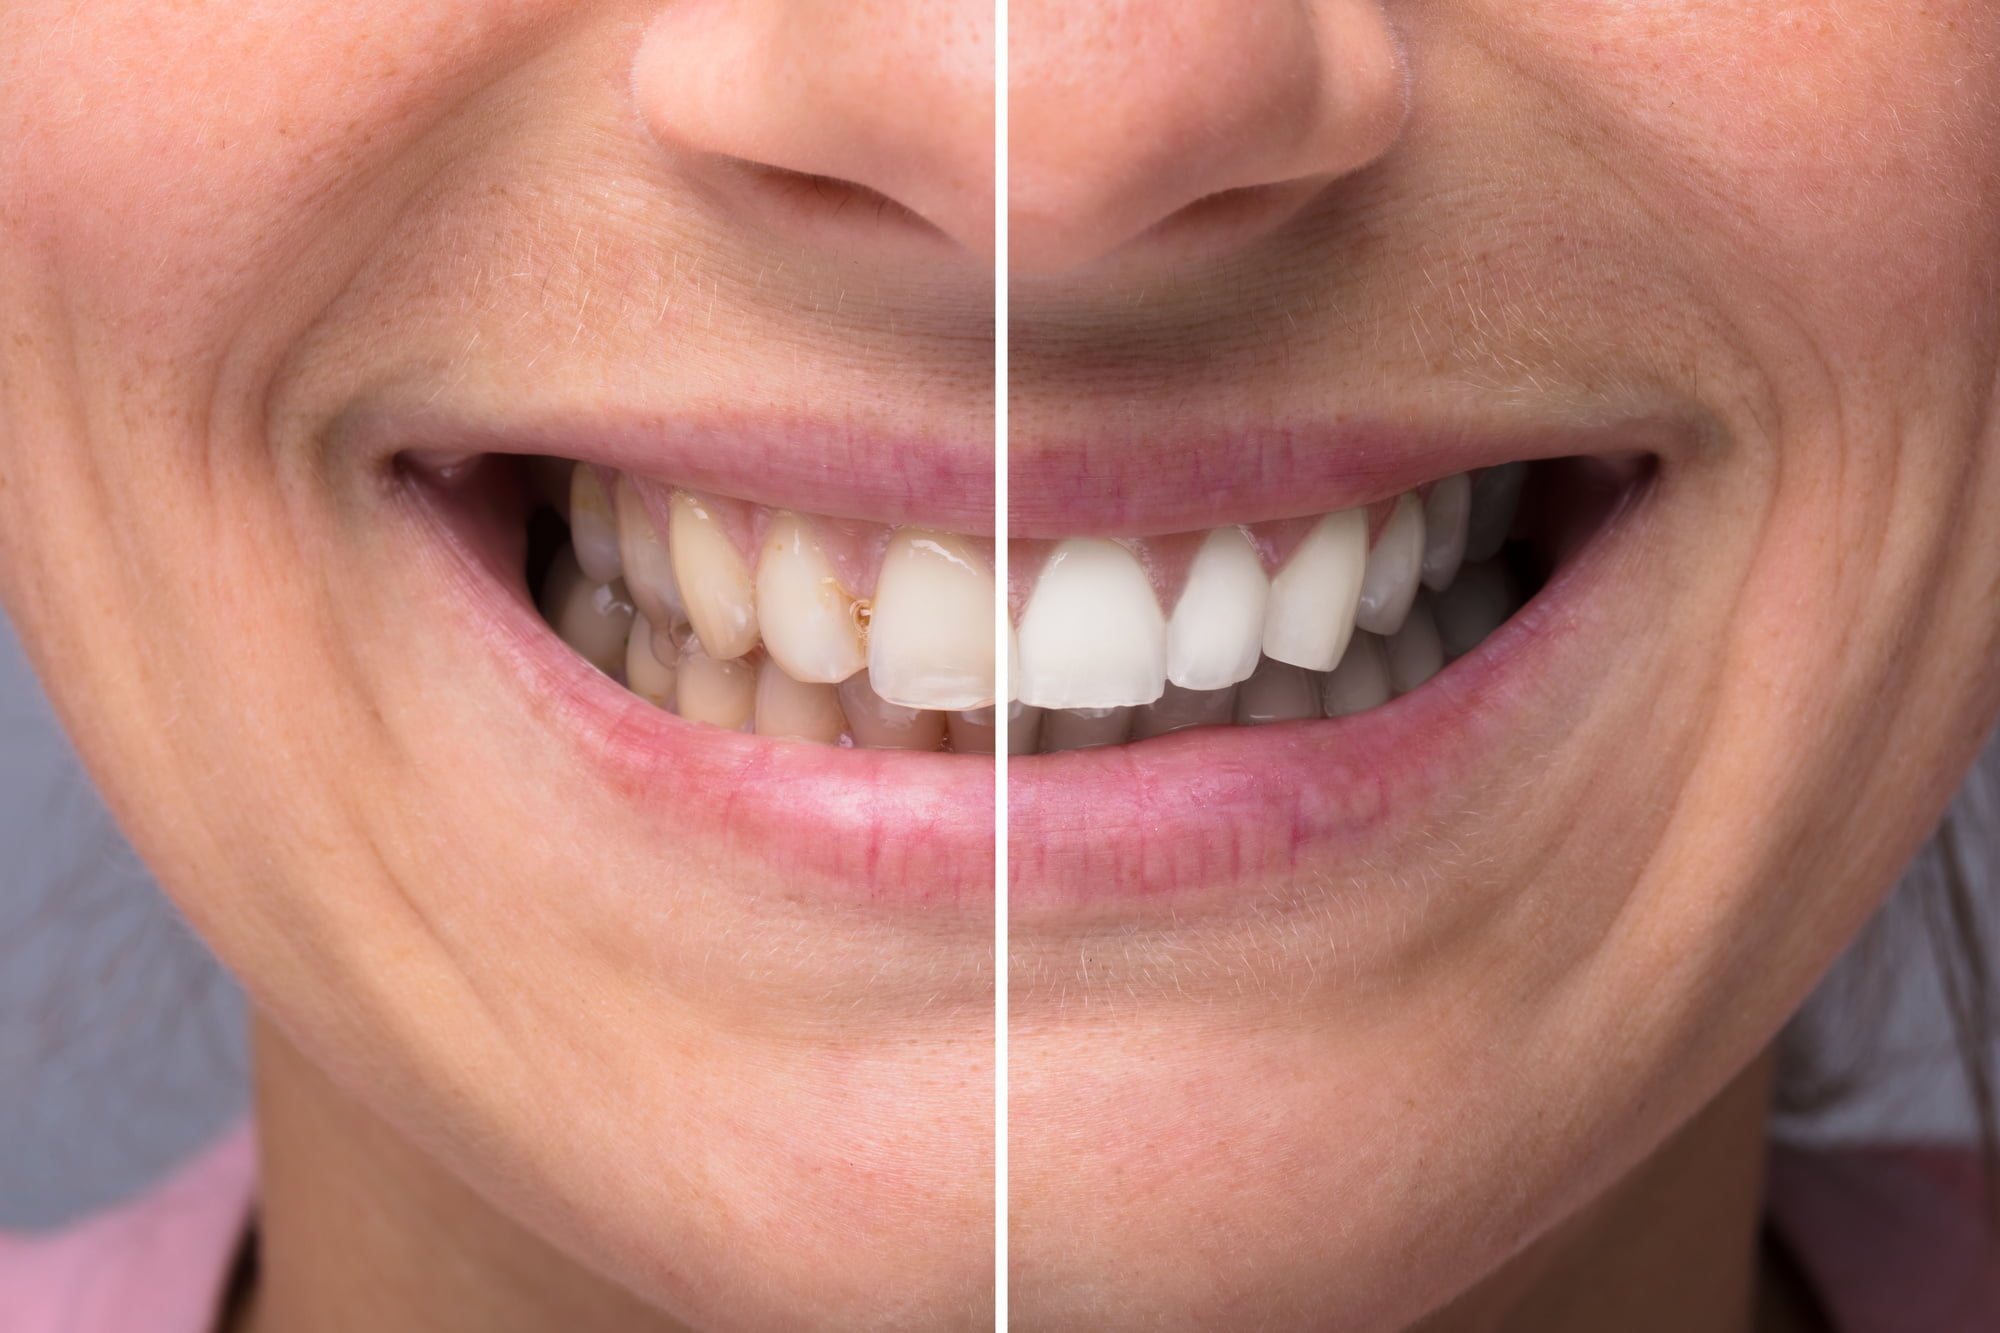 Do you know how stains get on your teeth? Explore your options for any tooth stain with these teeth whitening procedures.